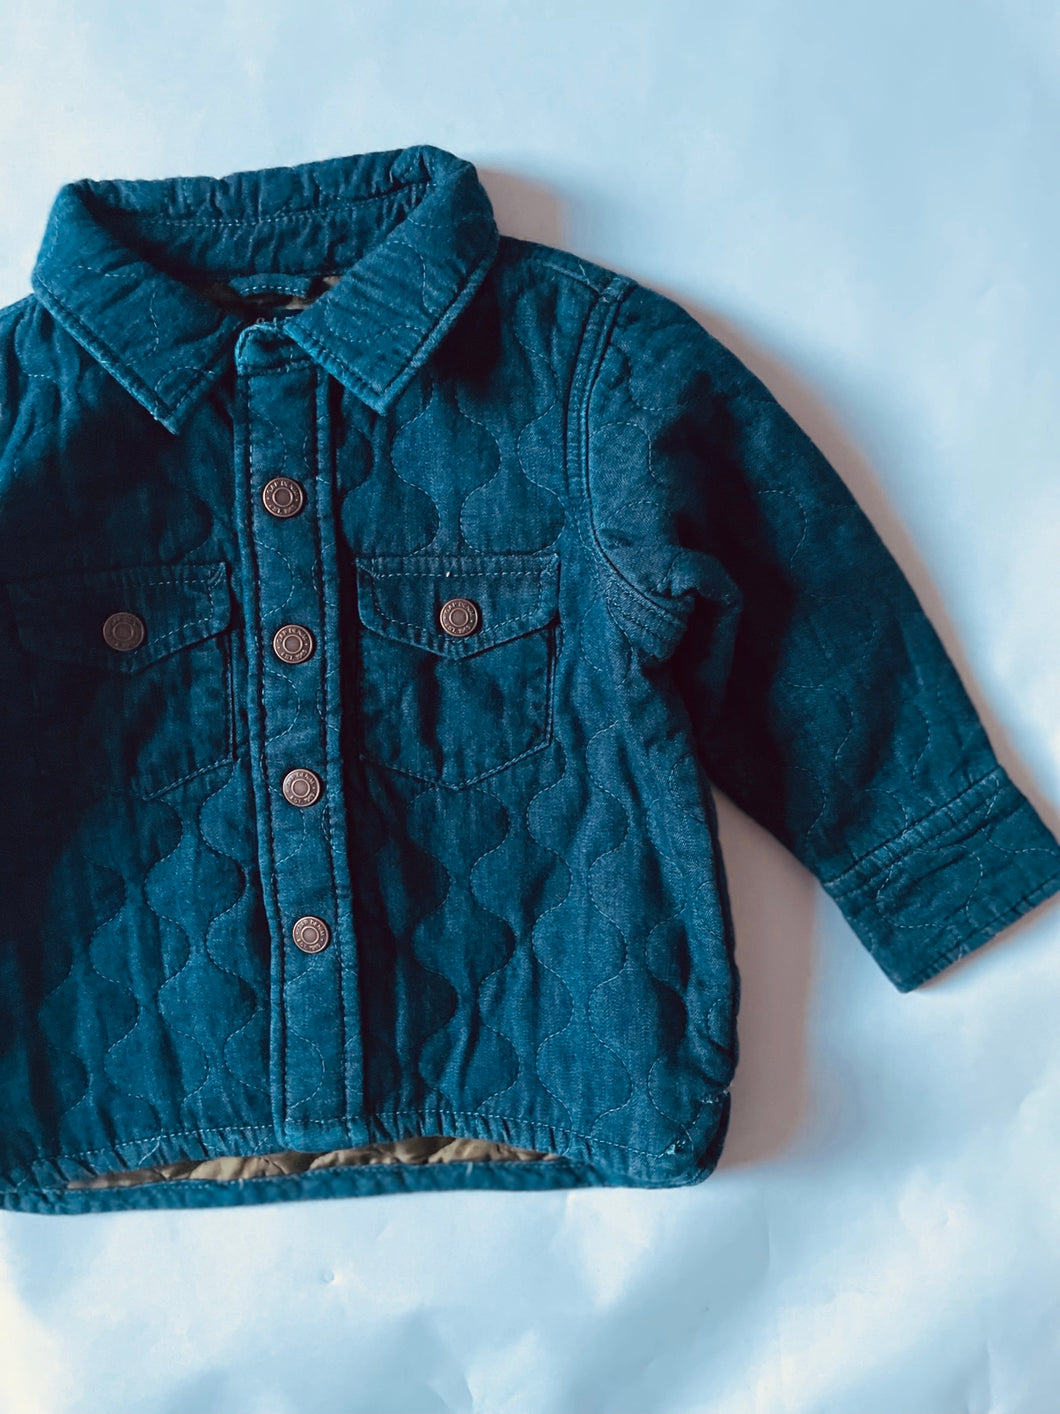 1.5-2 years - Quilted denim jacket